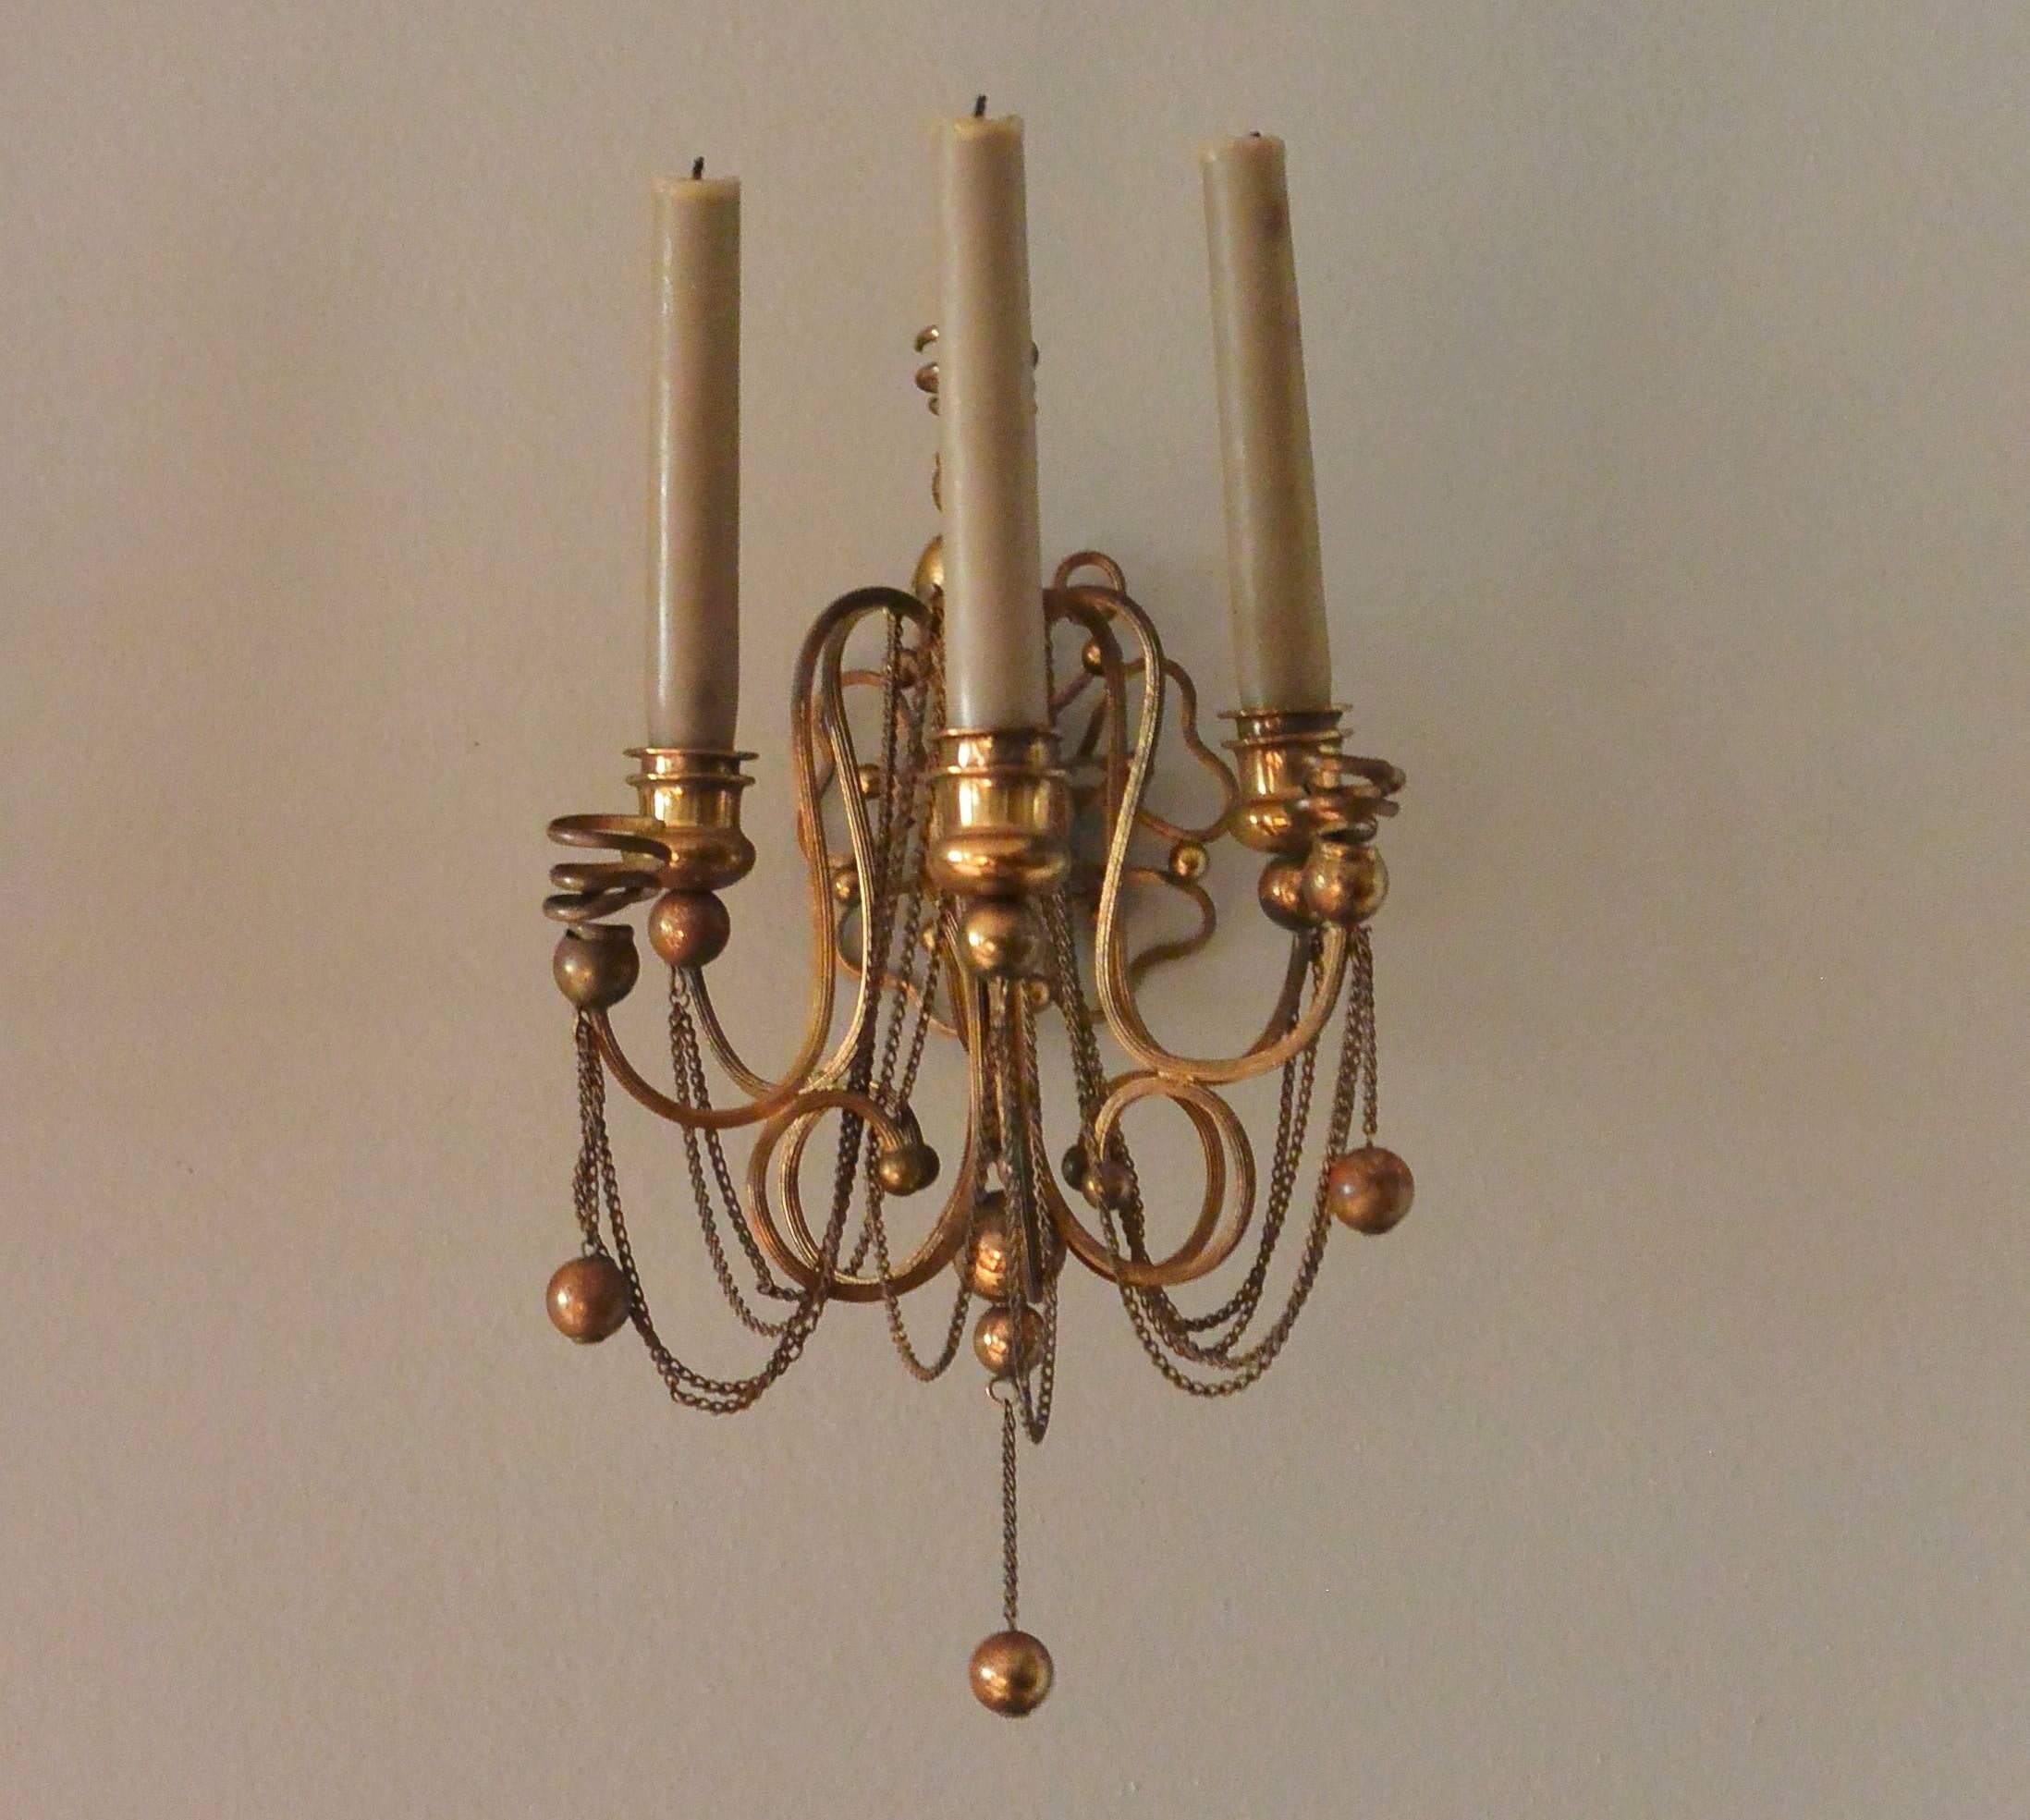 European Continental Brass Ball and Chain Candle Sconces For Sale